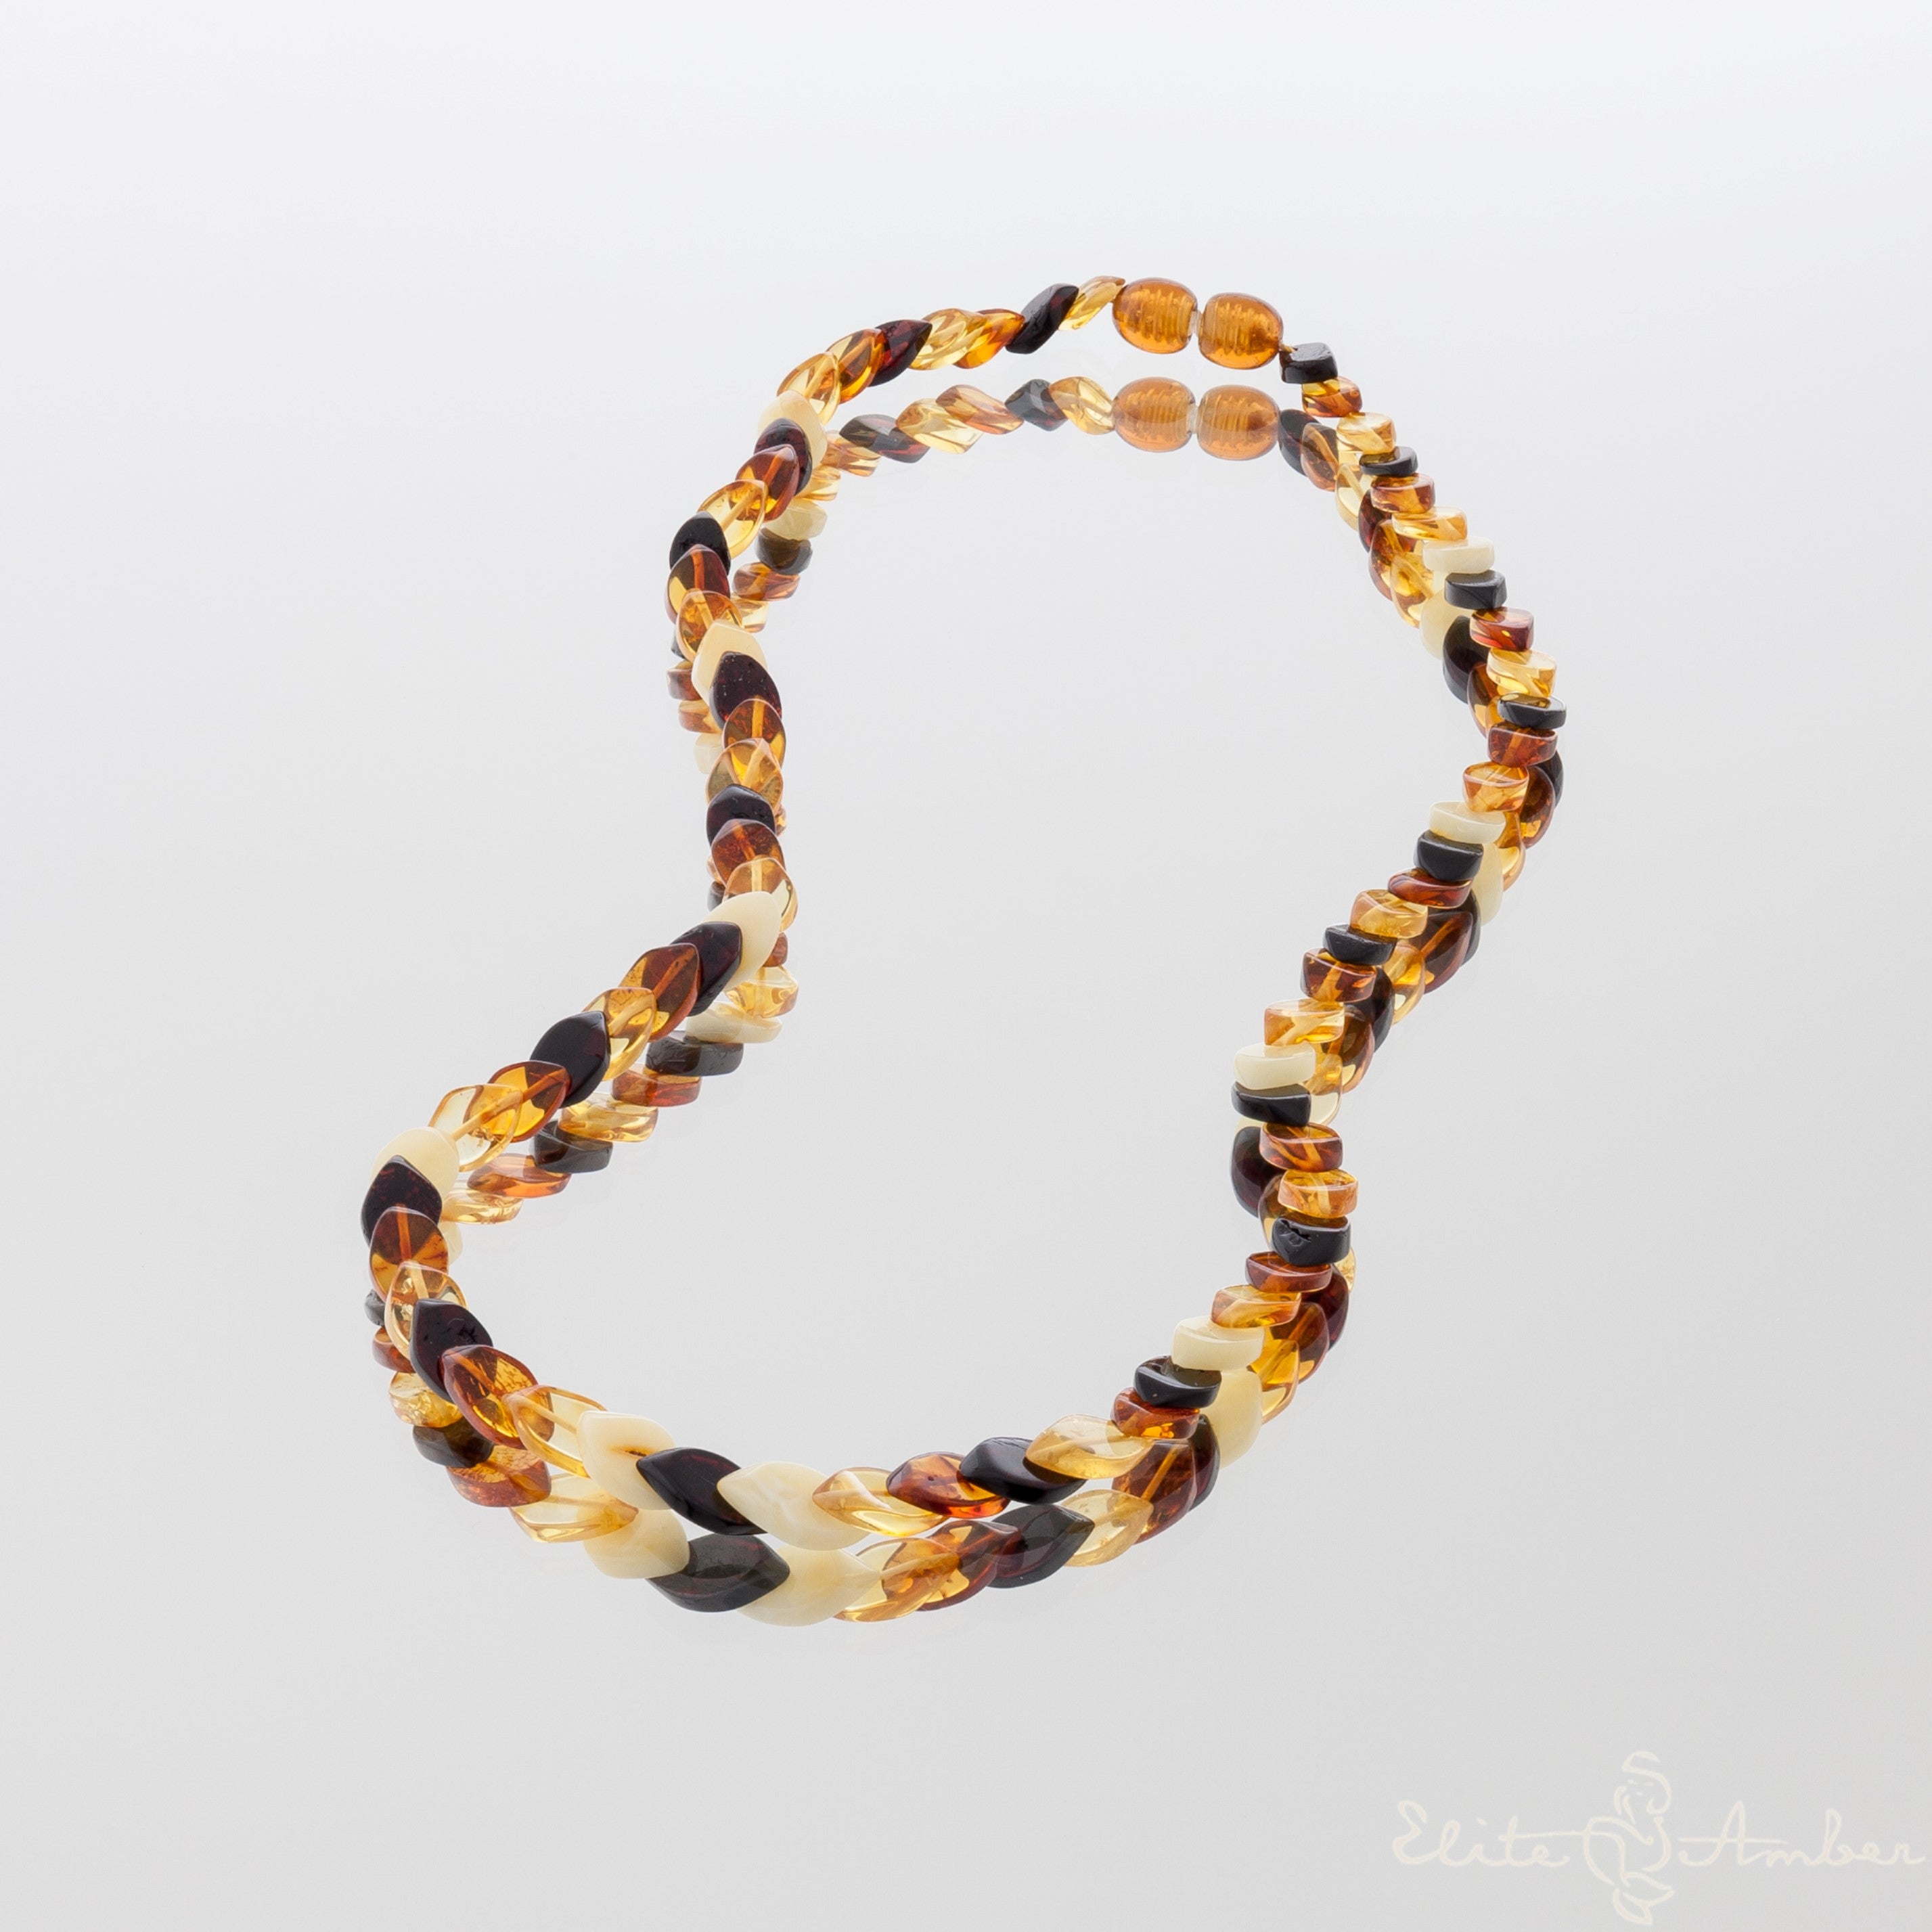 Amber necklace "White rain droplets"